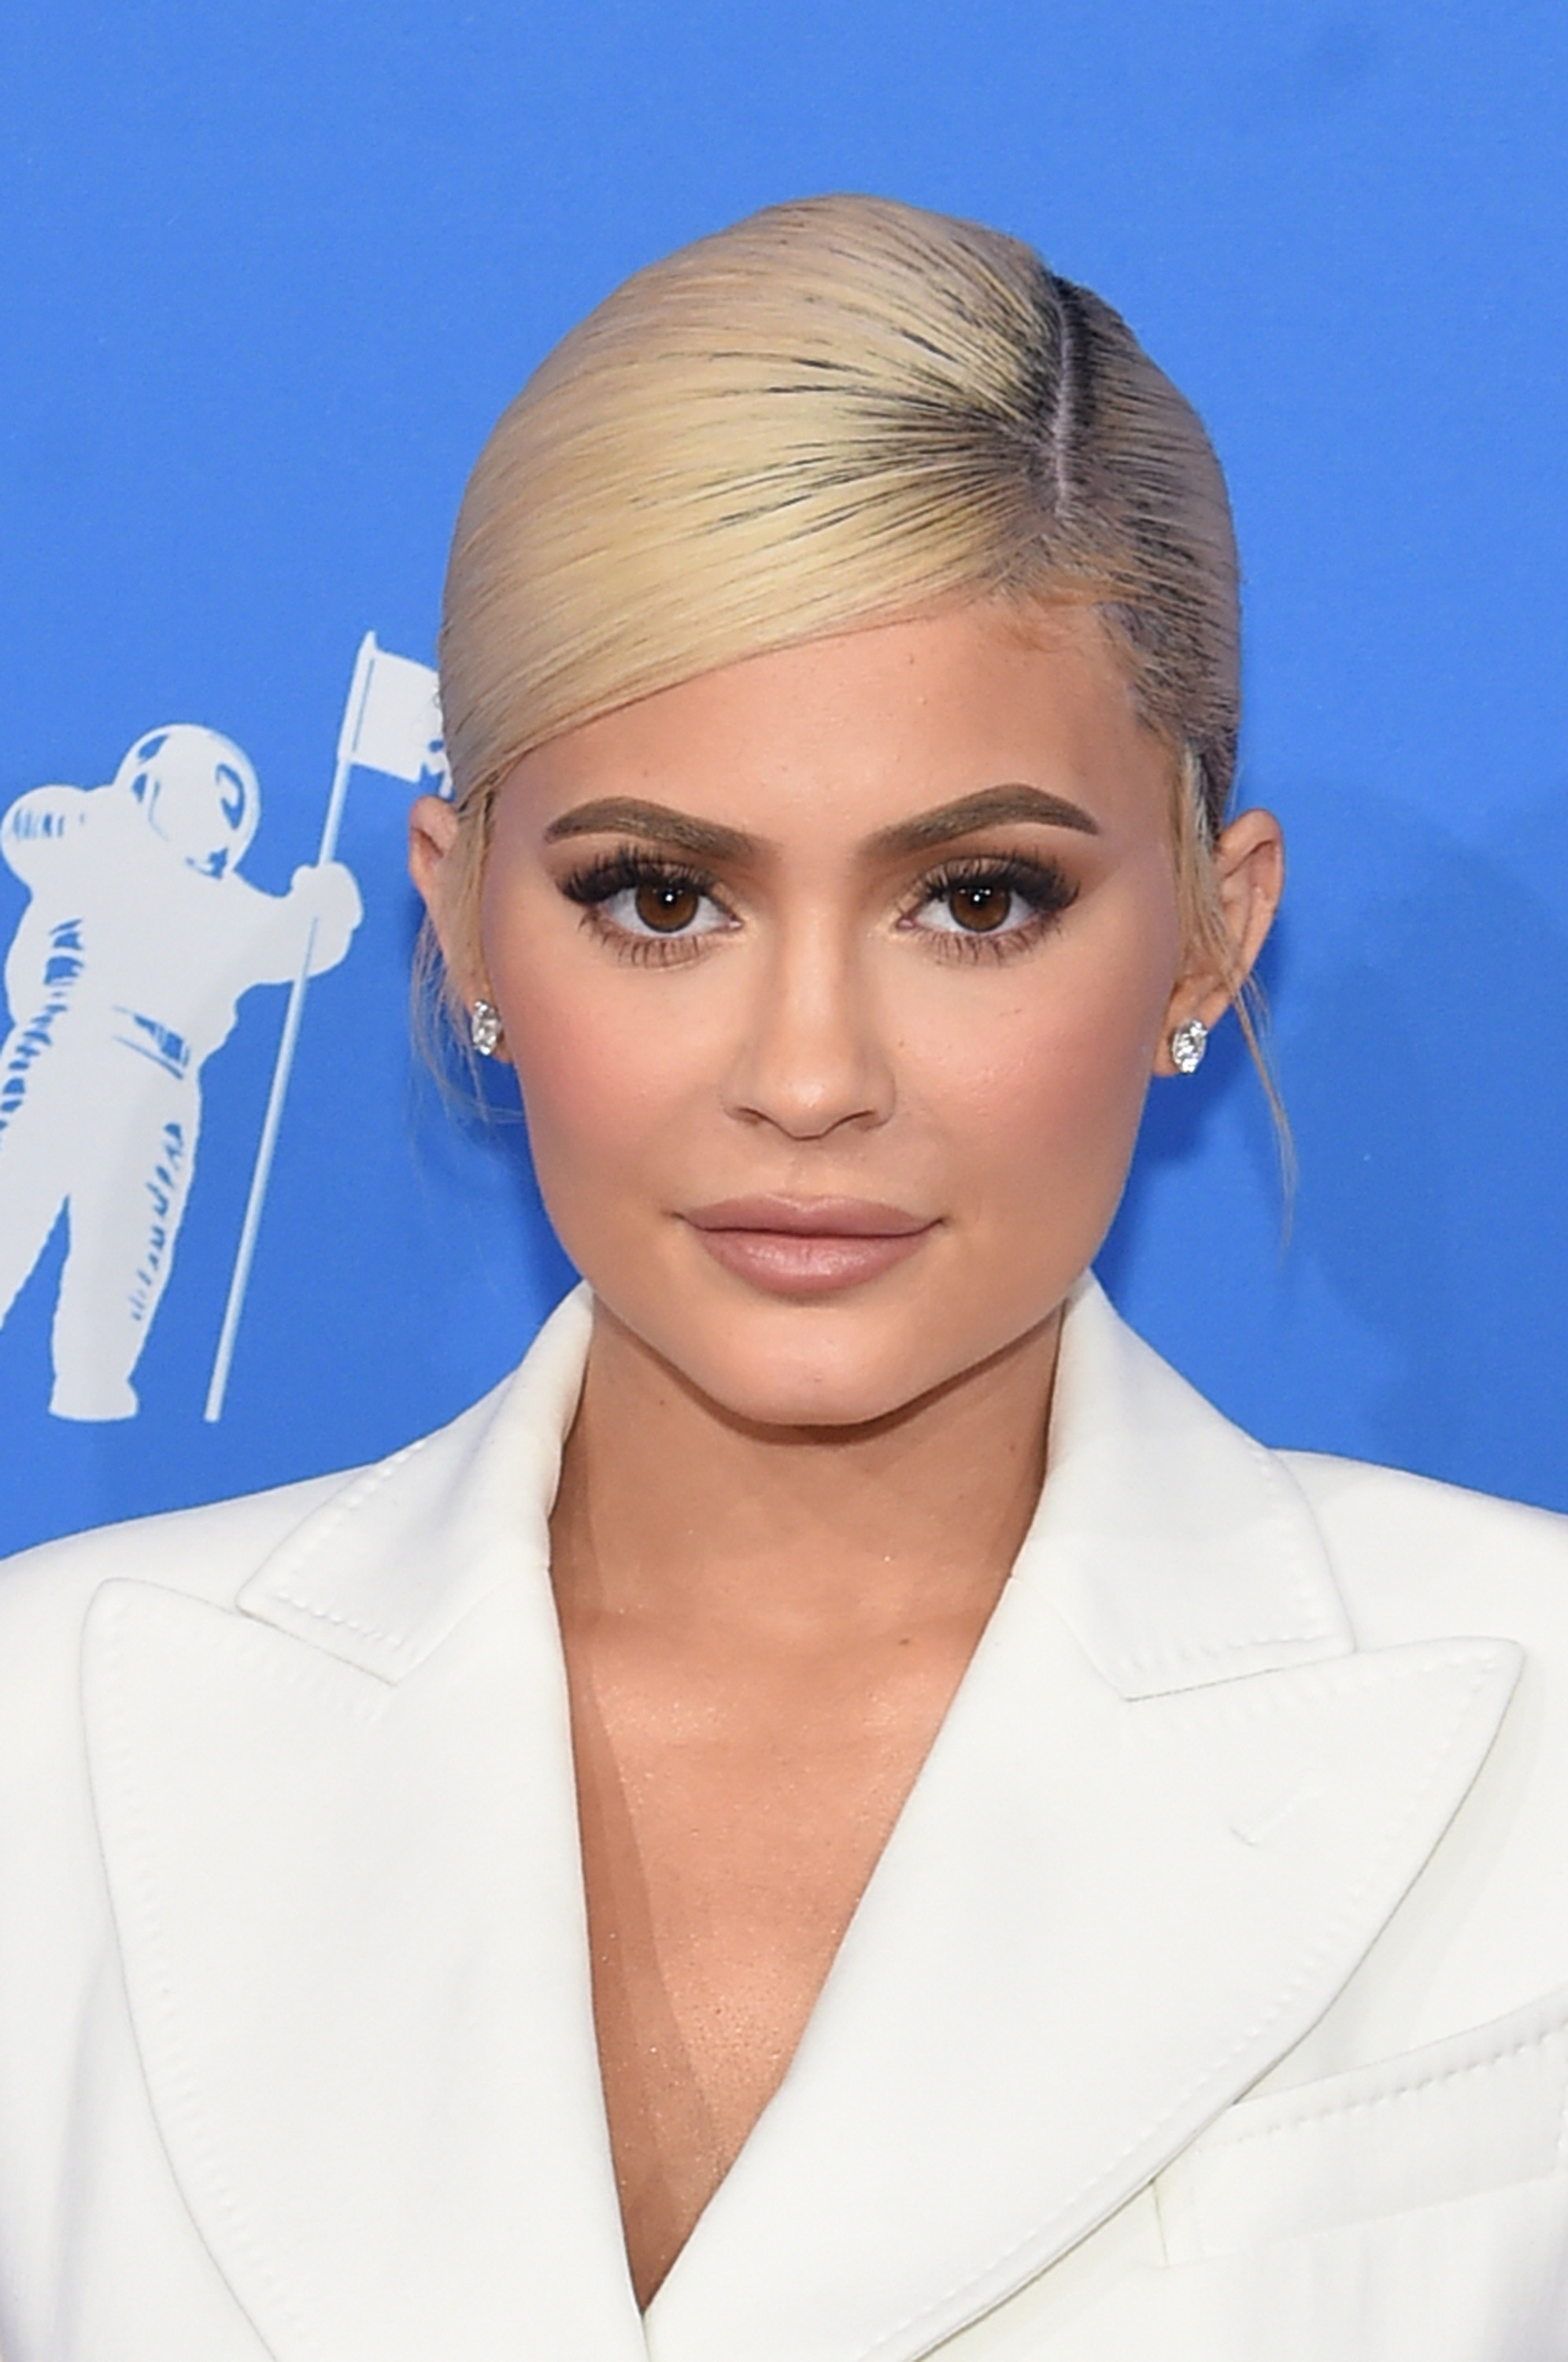 Kylie Jenner at the 2018 MTV Video Music Awards on August 20, 2018, in New York City. | Source: Getty Images